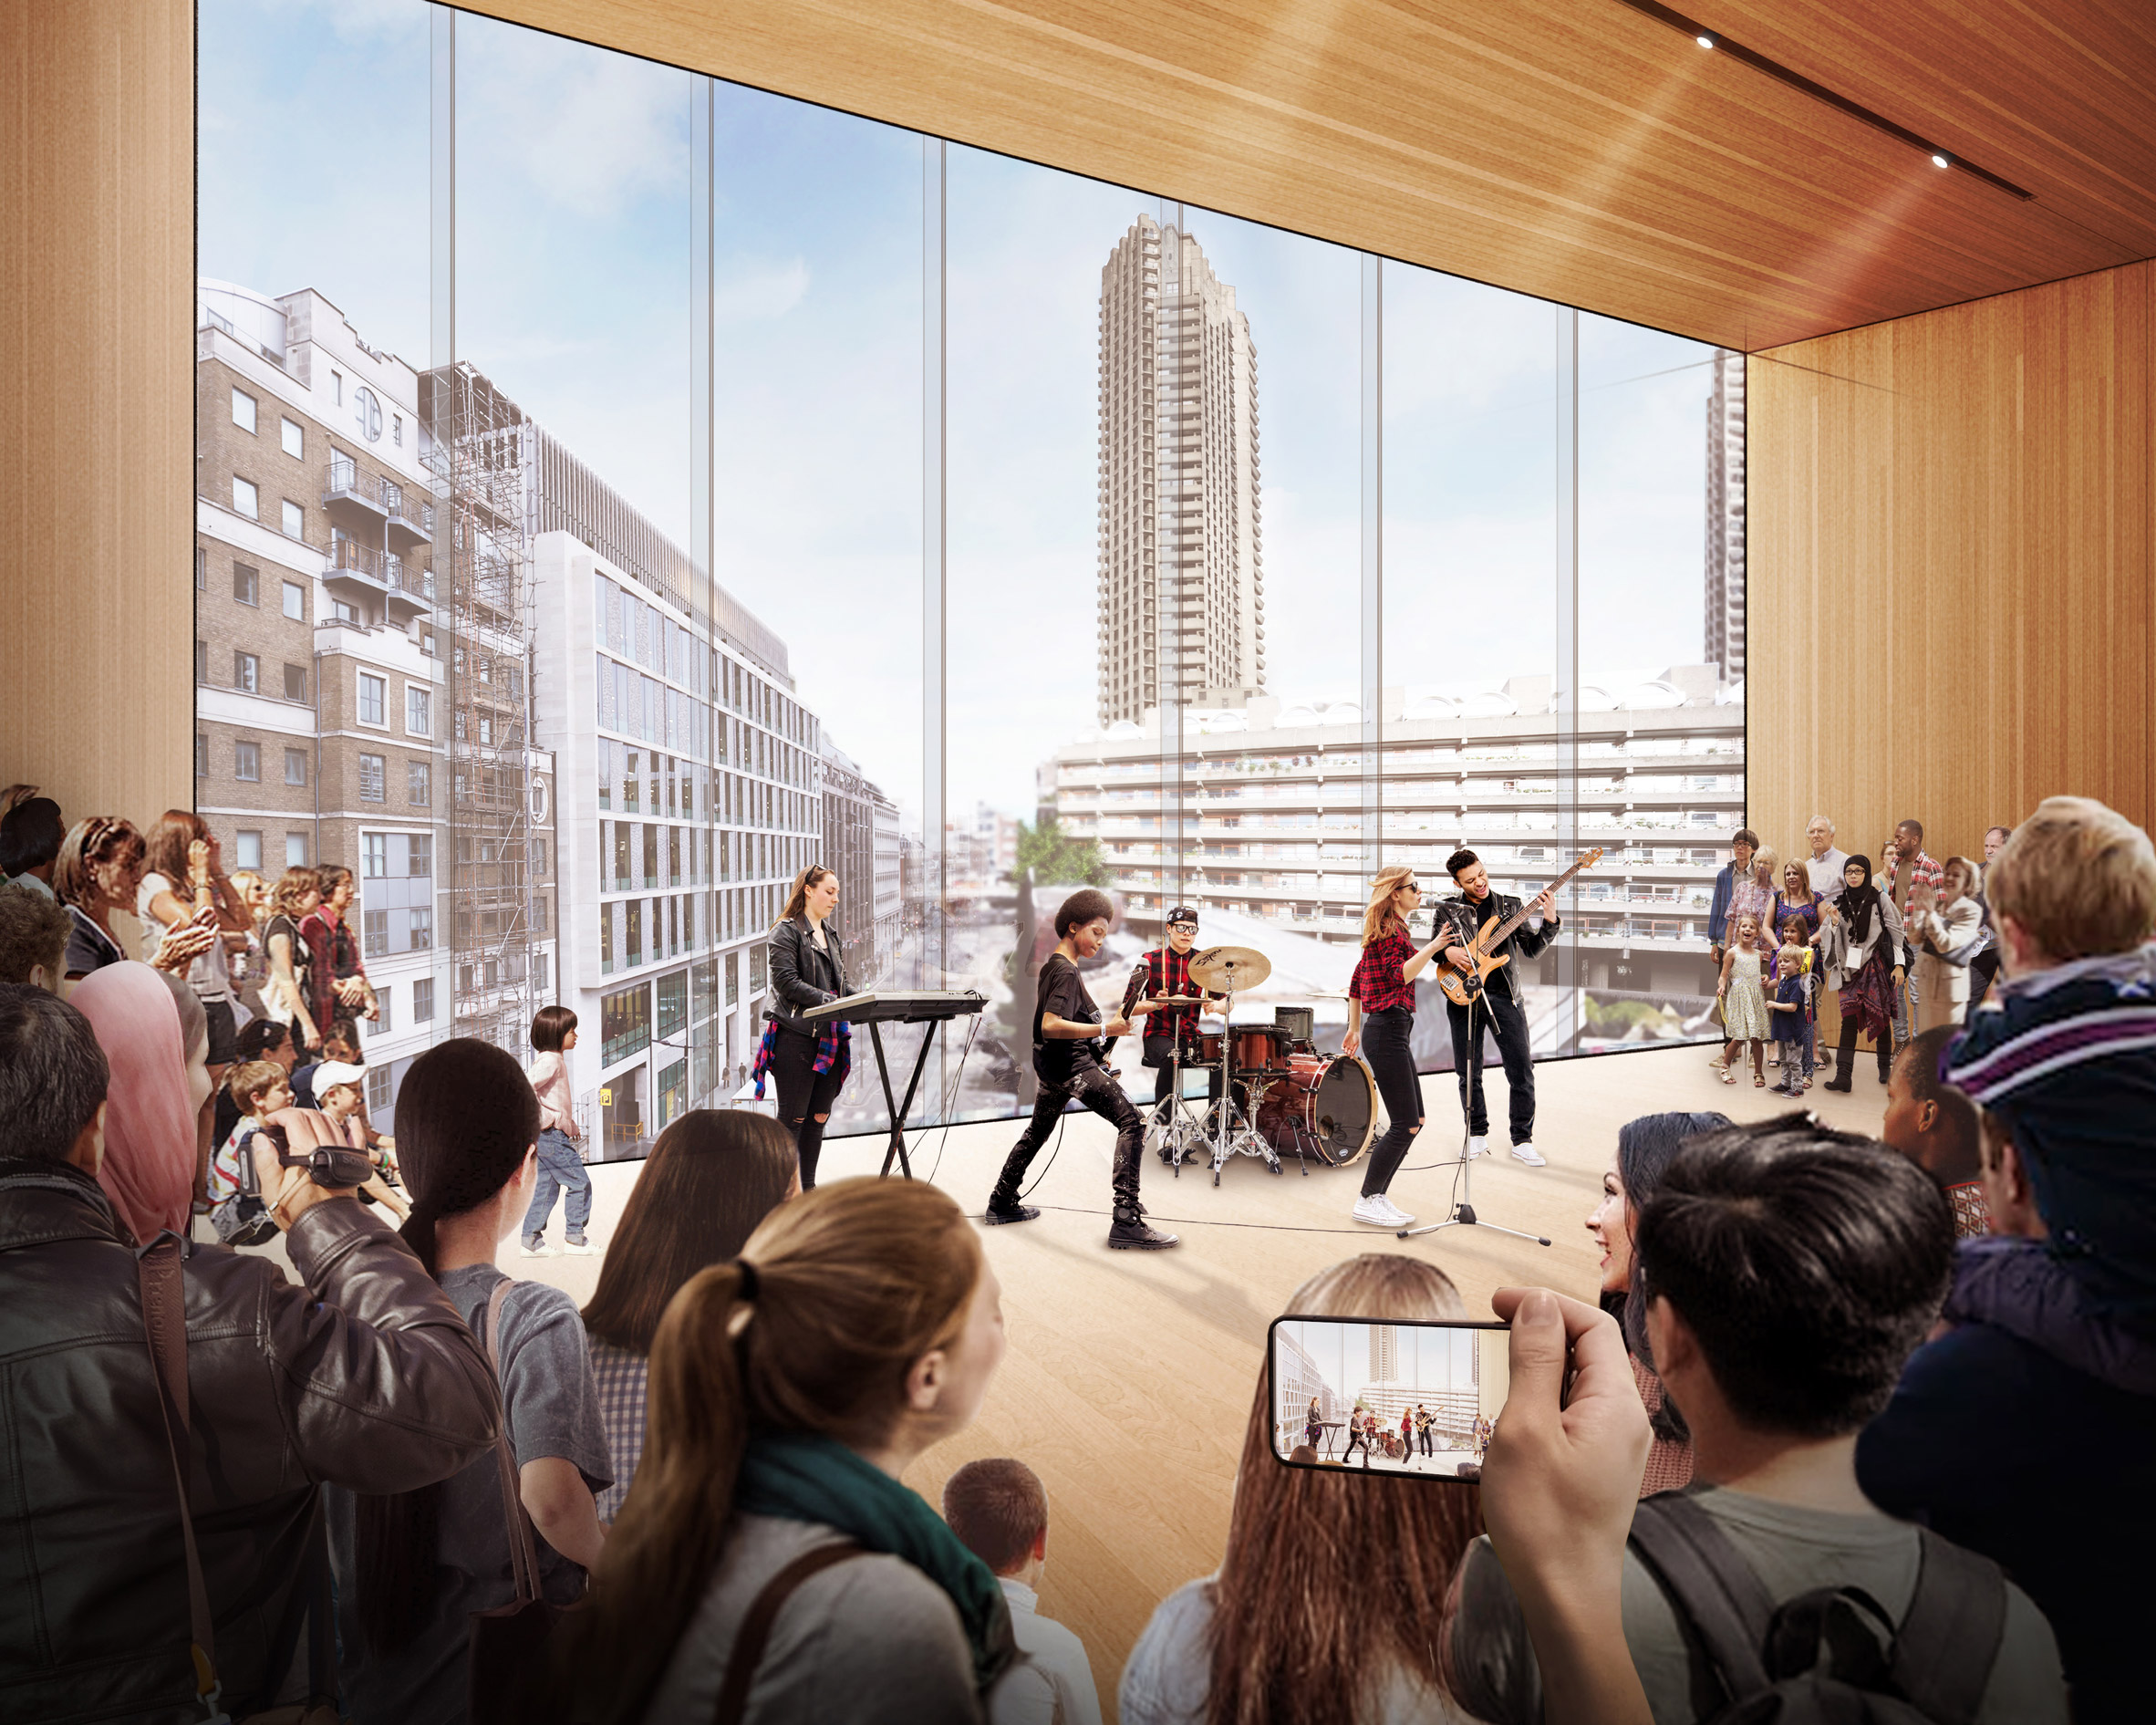 London Centre for Music by Diller Scofidio + Renfro